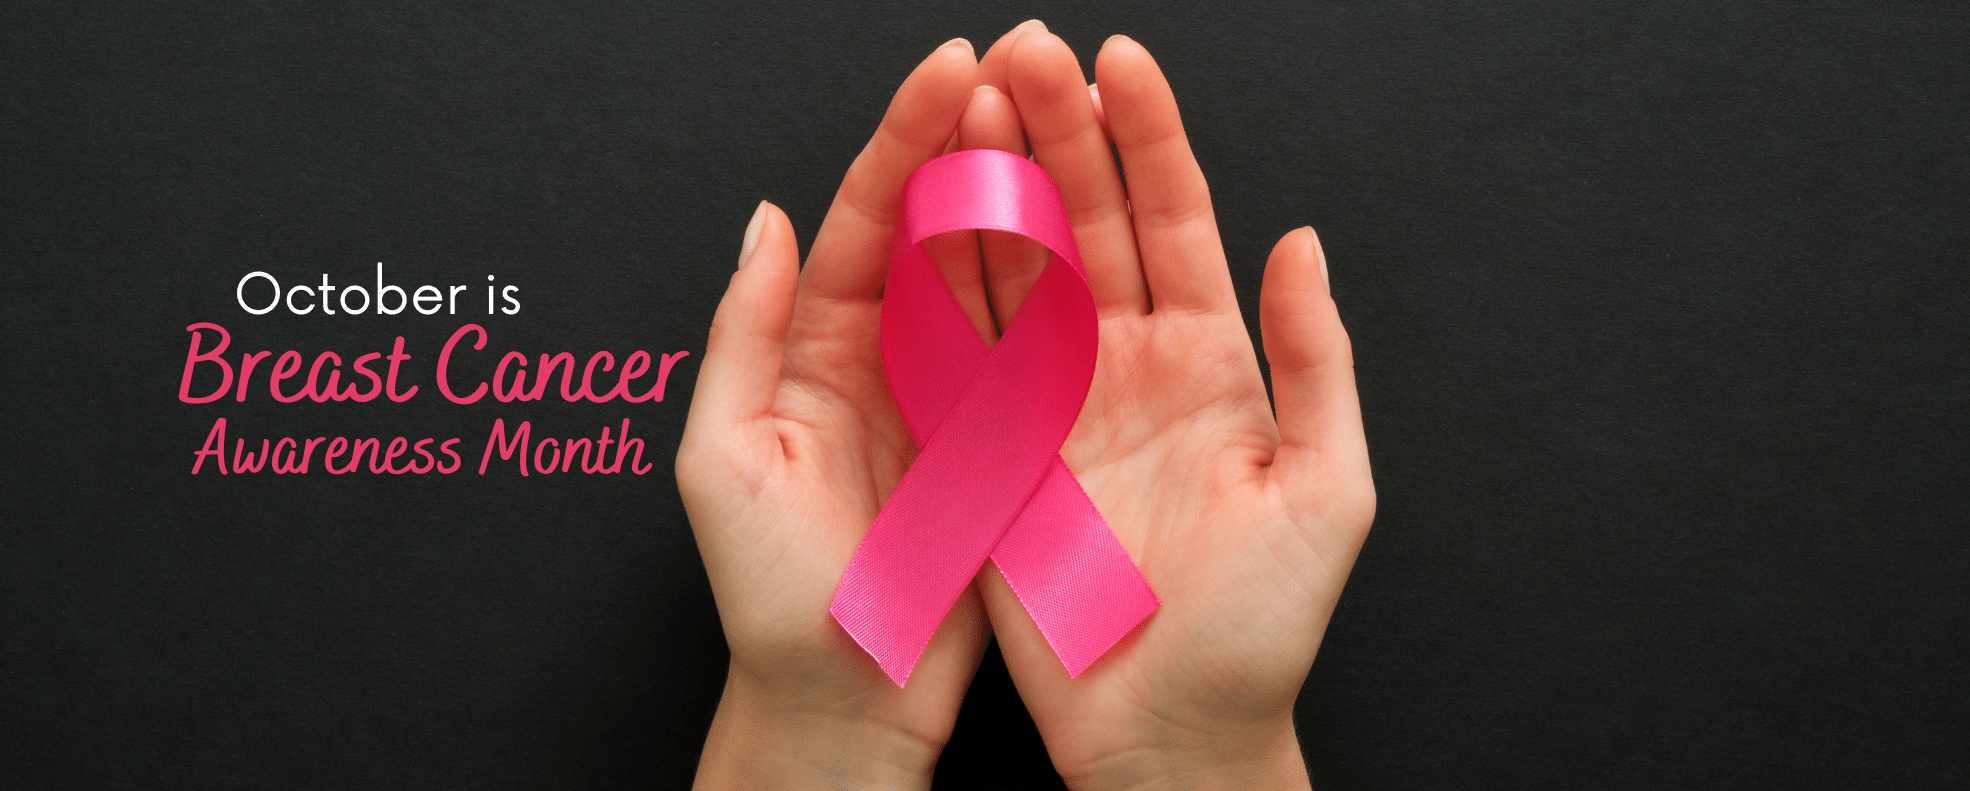 Michigan Institute of Obstetrics & Gynecology - Rounding out Breast Cancer  Awareness Month with a post to help you understand some breast cancer terms  🎀💗 Breast cancers are named based on the